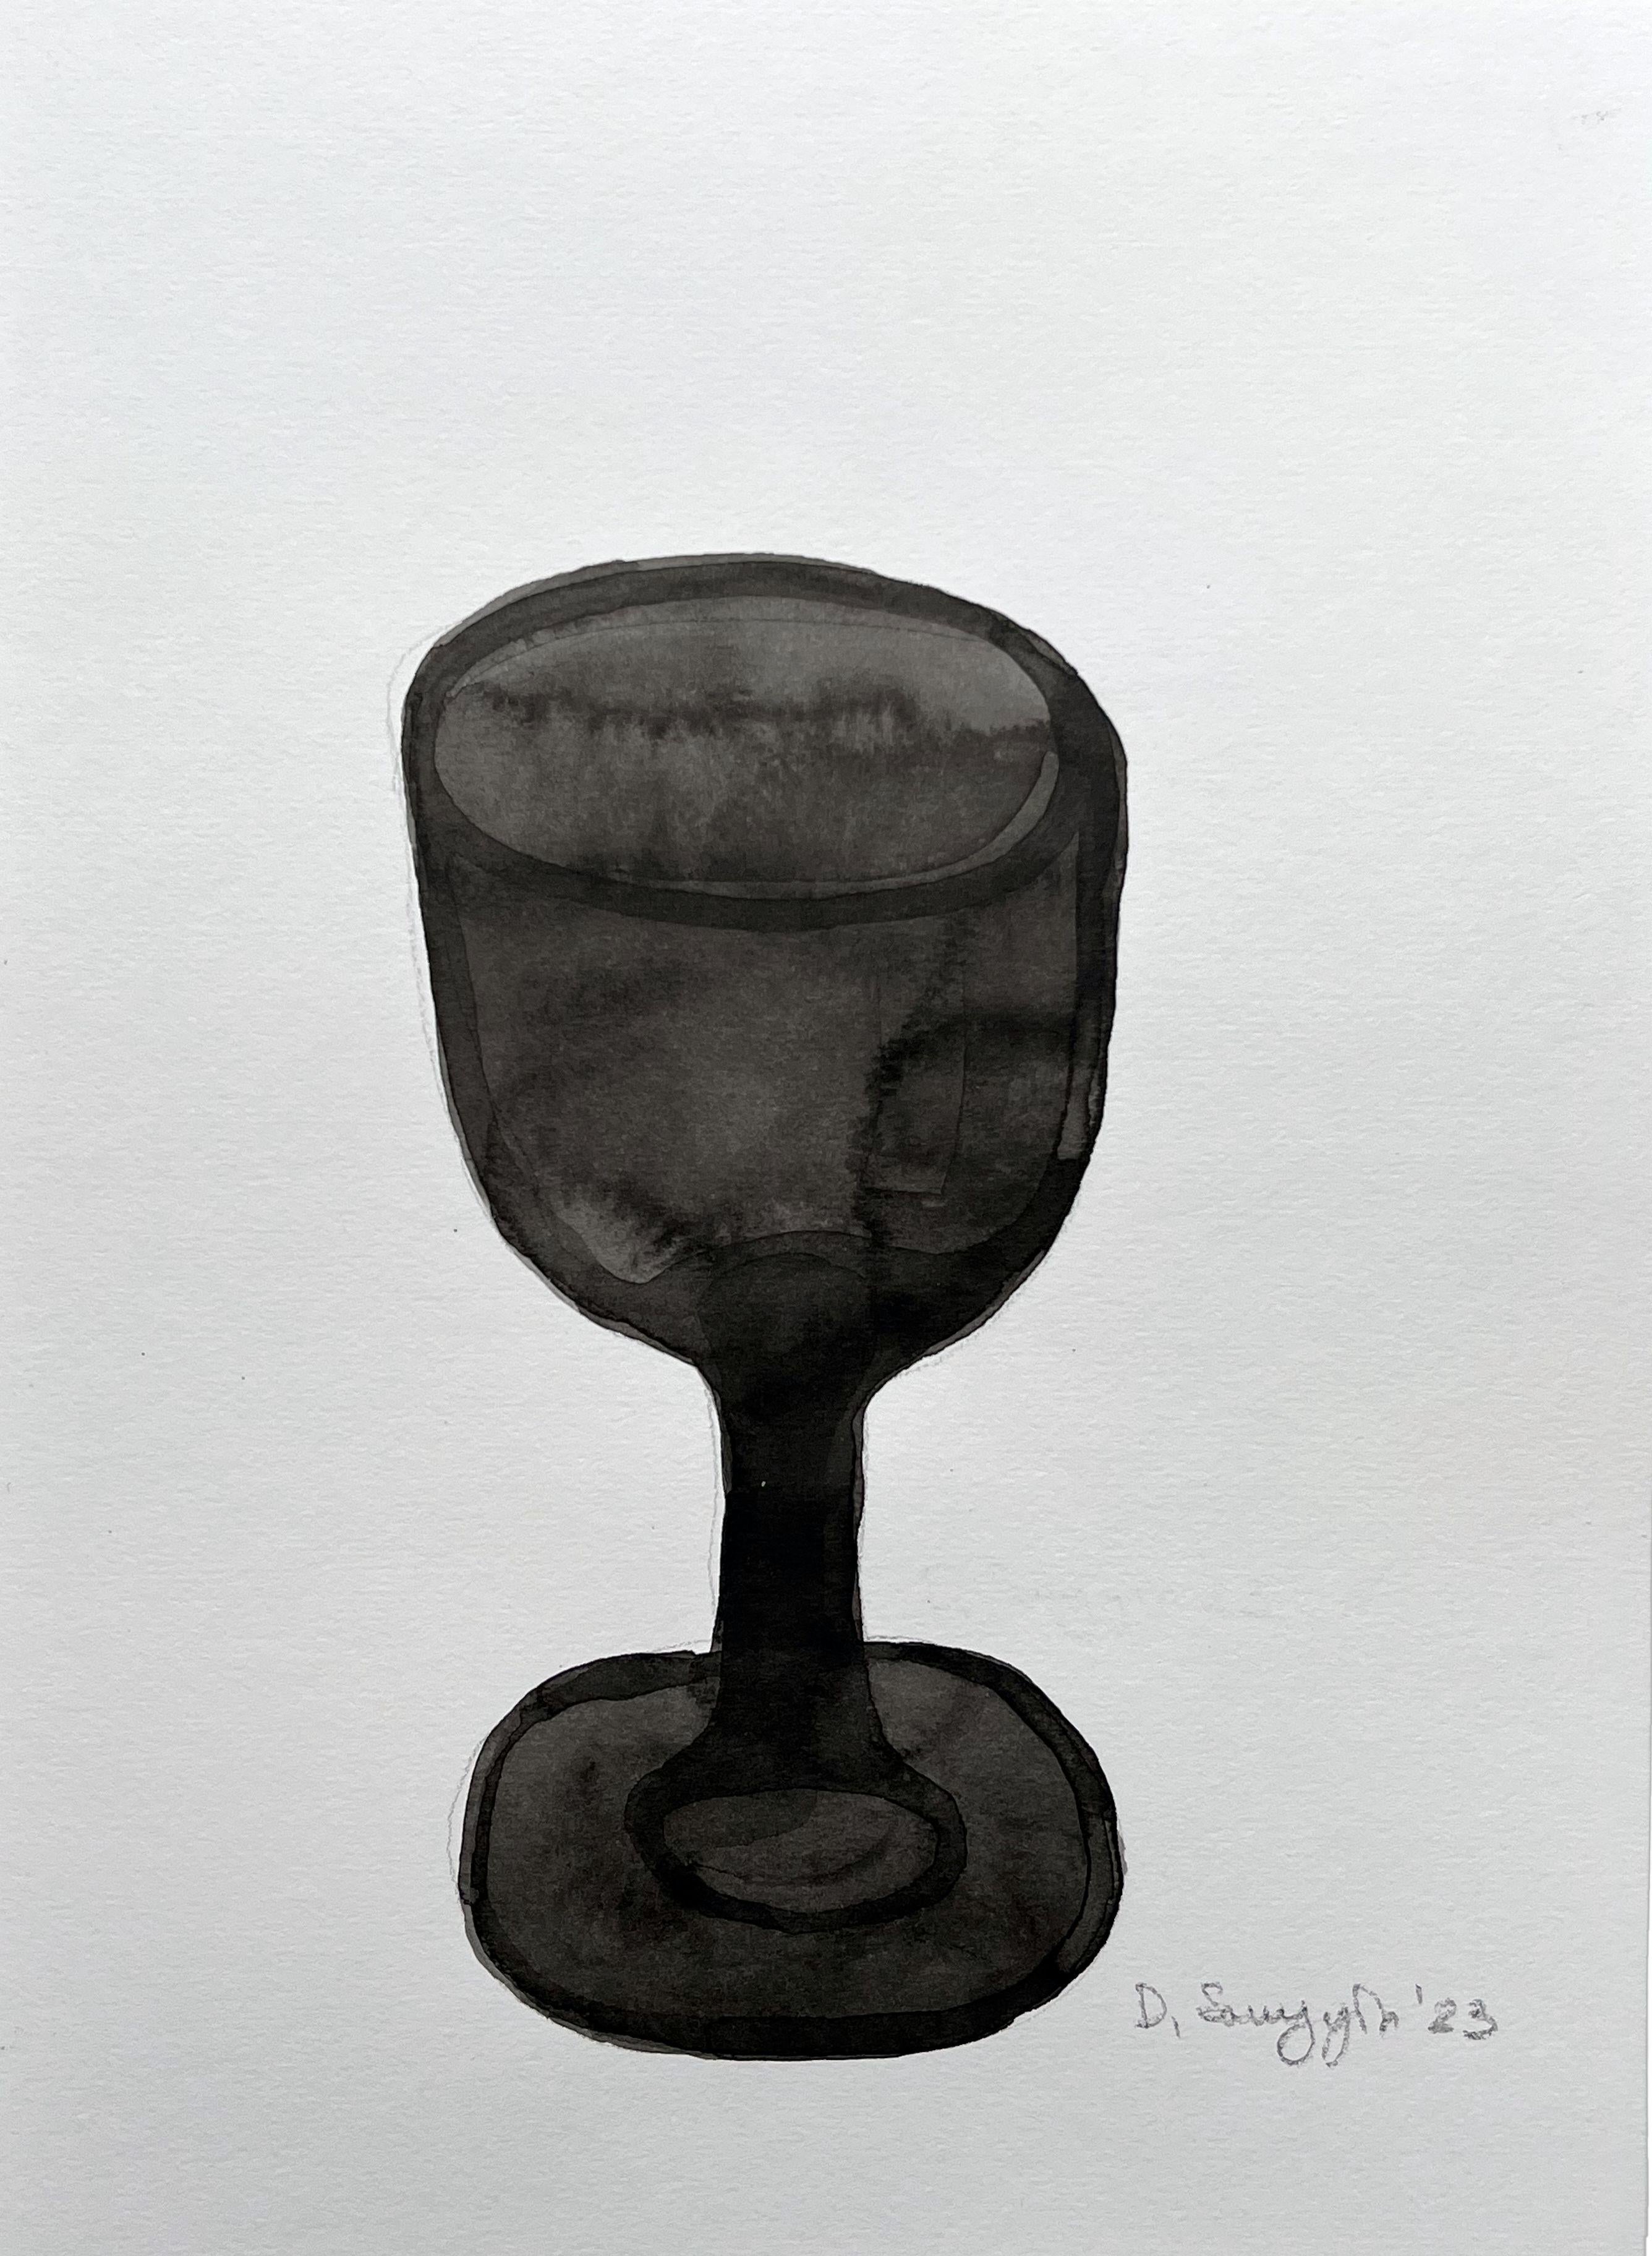 Figurative Ink on Cotton paper 
Painting N.3 'Glass of wine' by Dmitry Samygin

H.27 x 19.5 cm 

About Dmitry Samygin
Furniture and Product Designer. His approach relies on simple forms and clarity in ideas with carefully chosen materials to expose